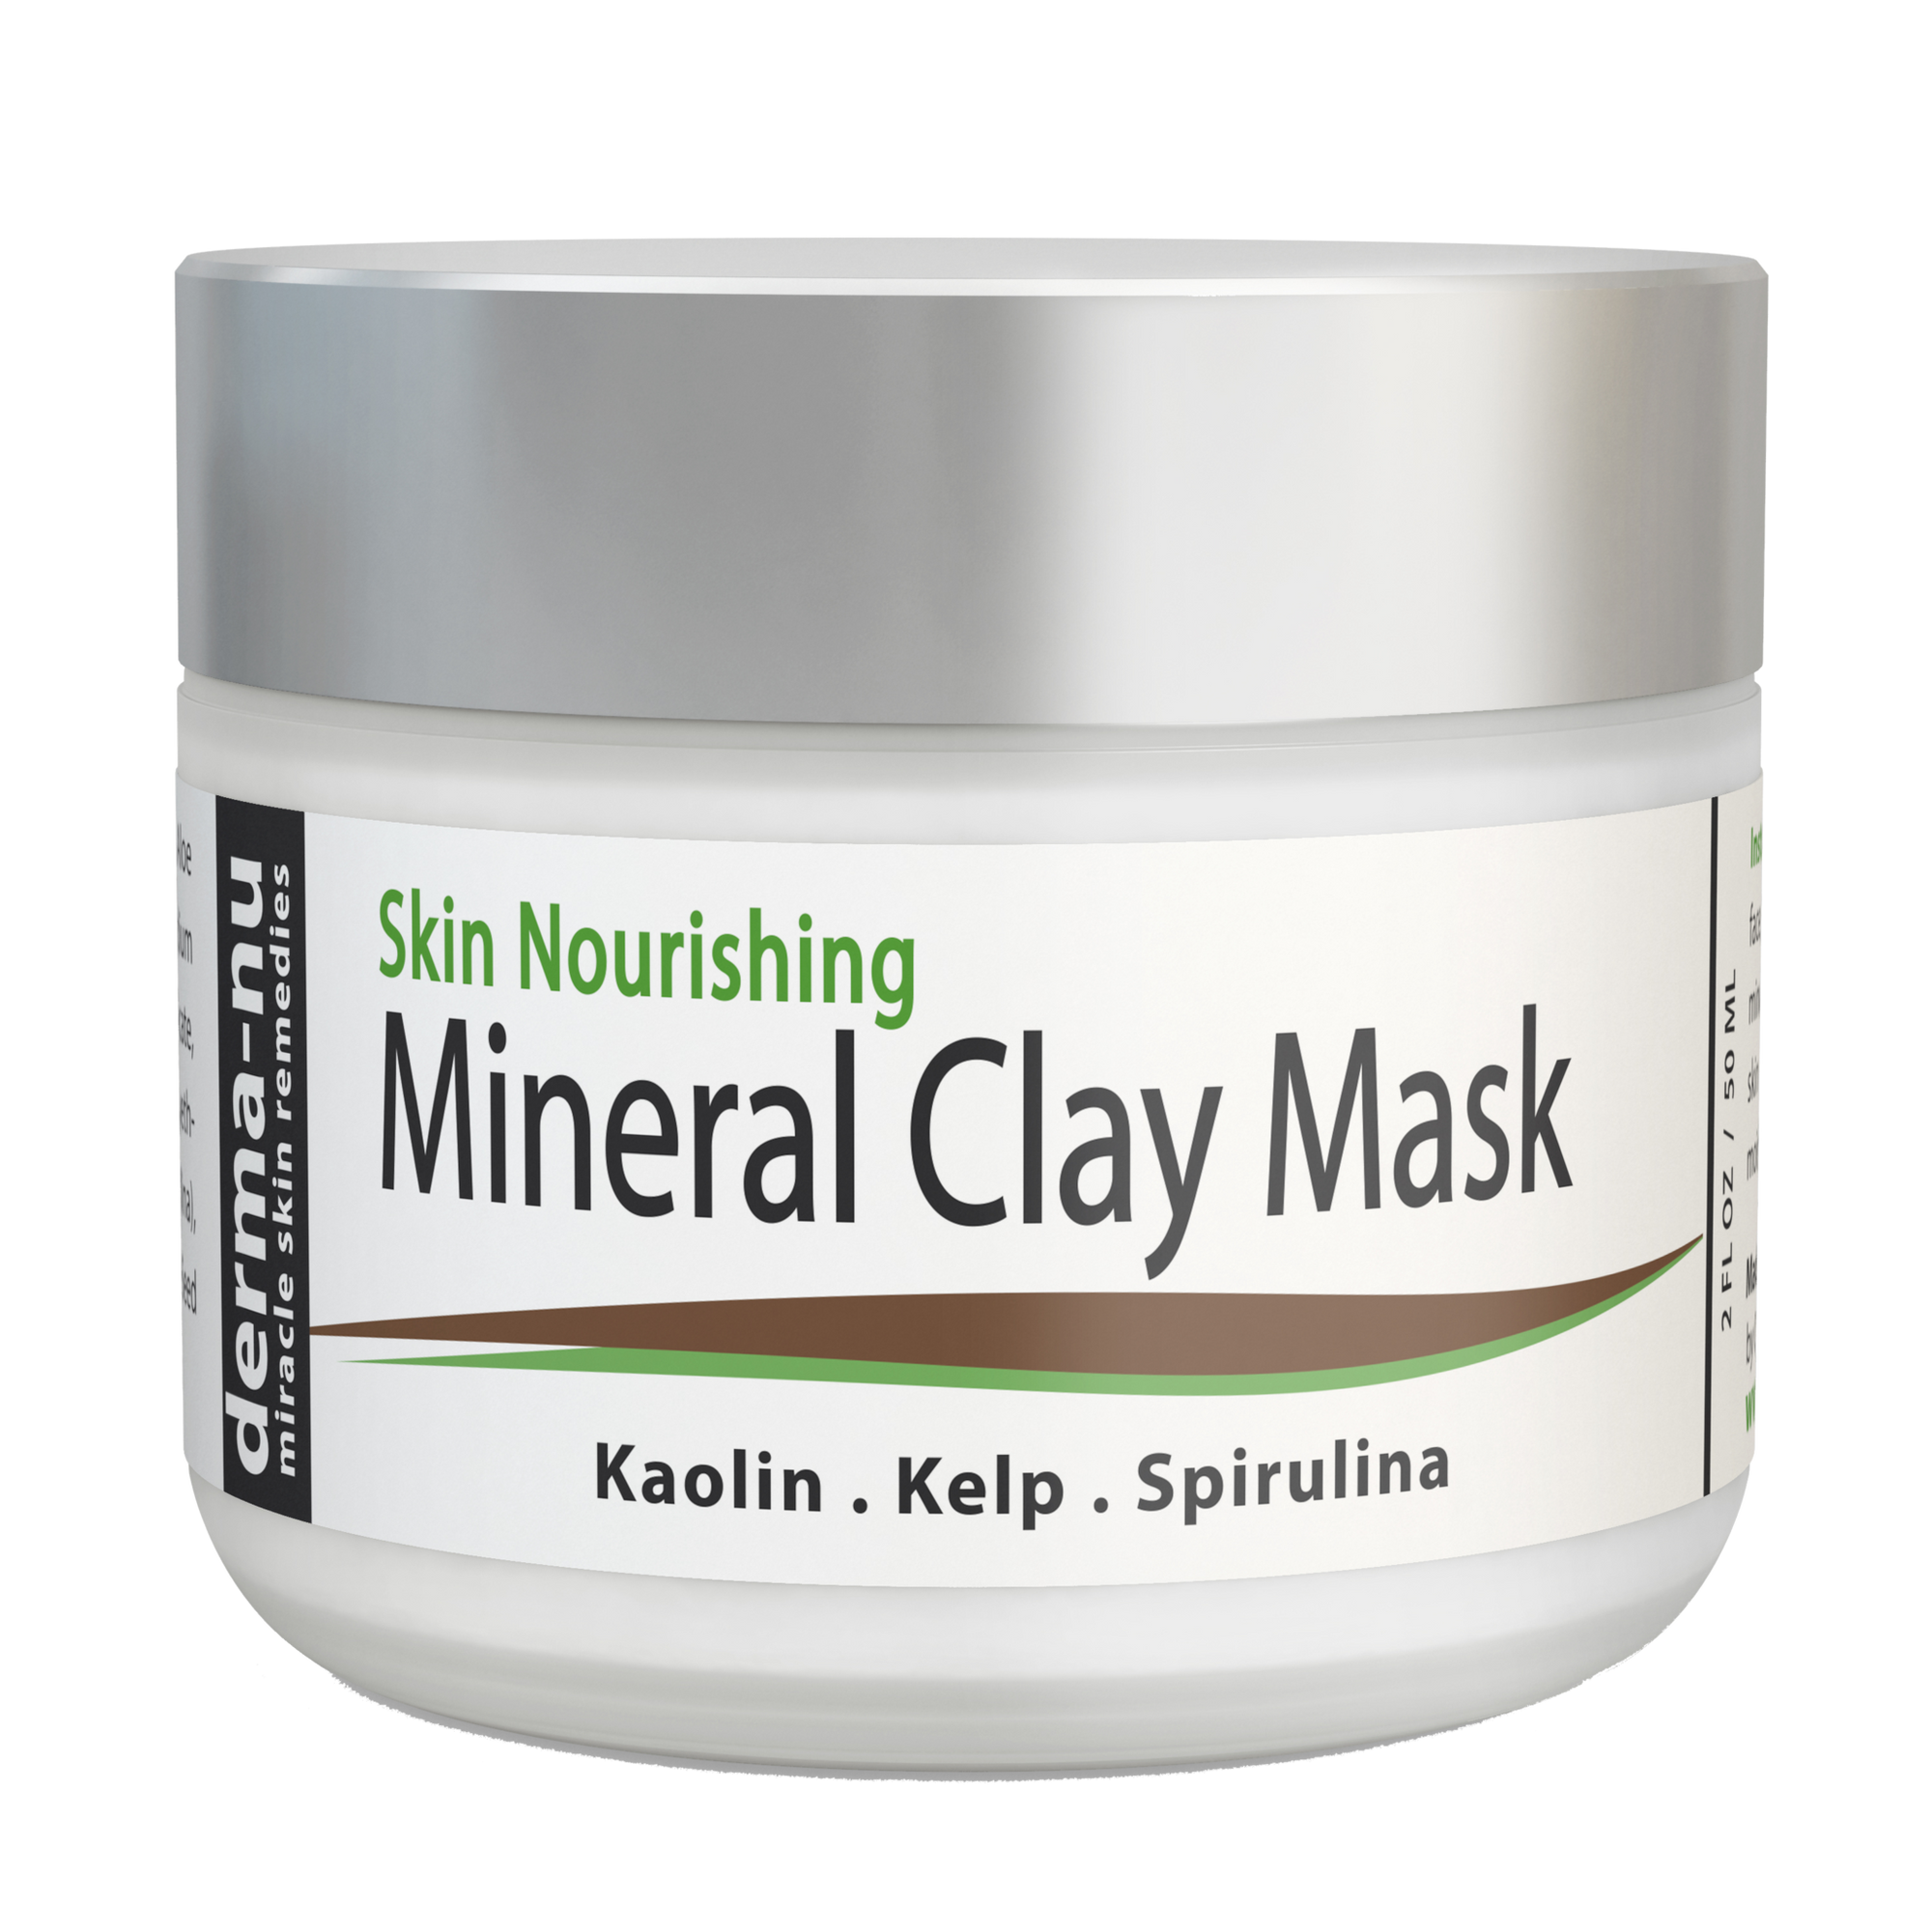 Mineral Clay Mask is Effective on all Skin Types